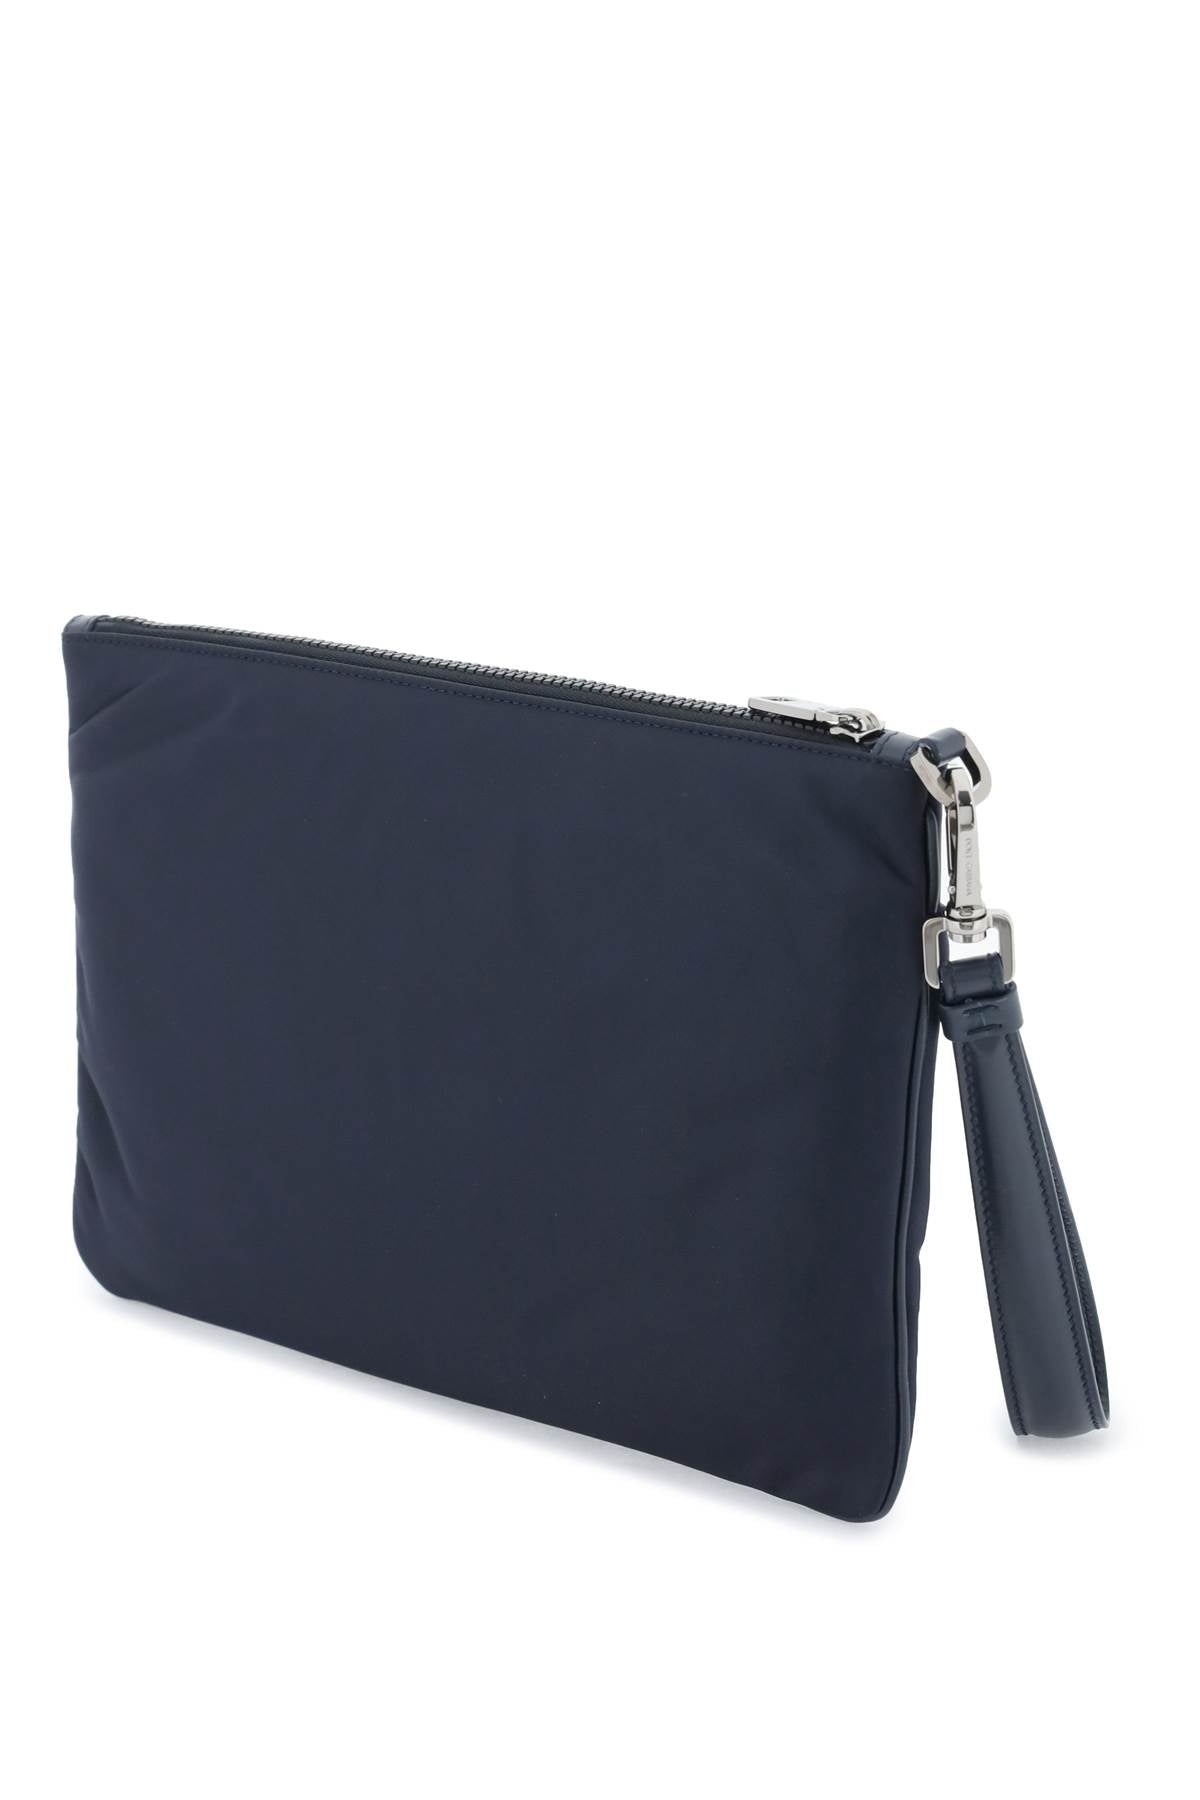 DOLCE & GABBANA Men's Blue Nylon and Leather Clutch - SS24 Collection